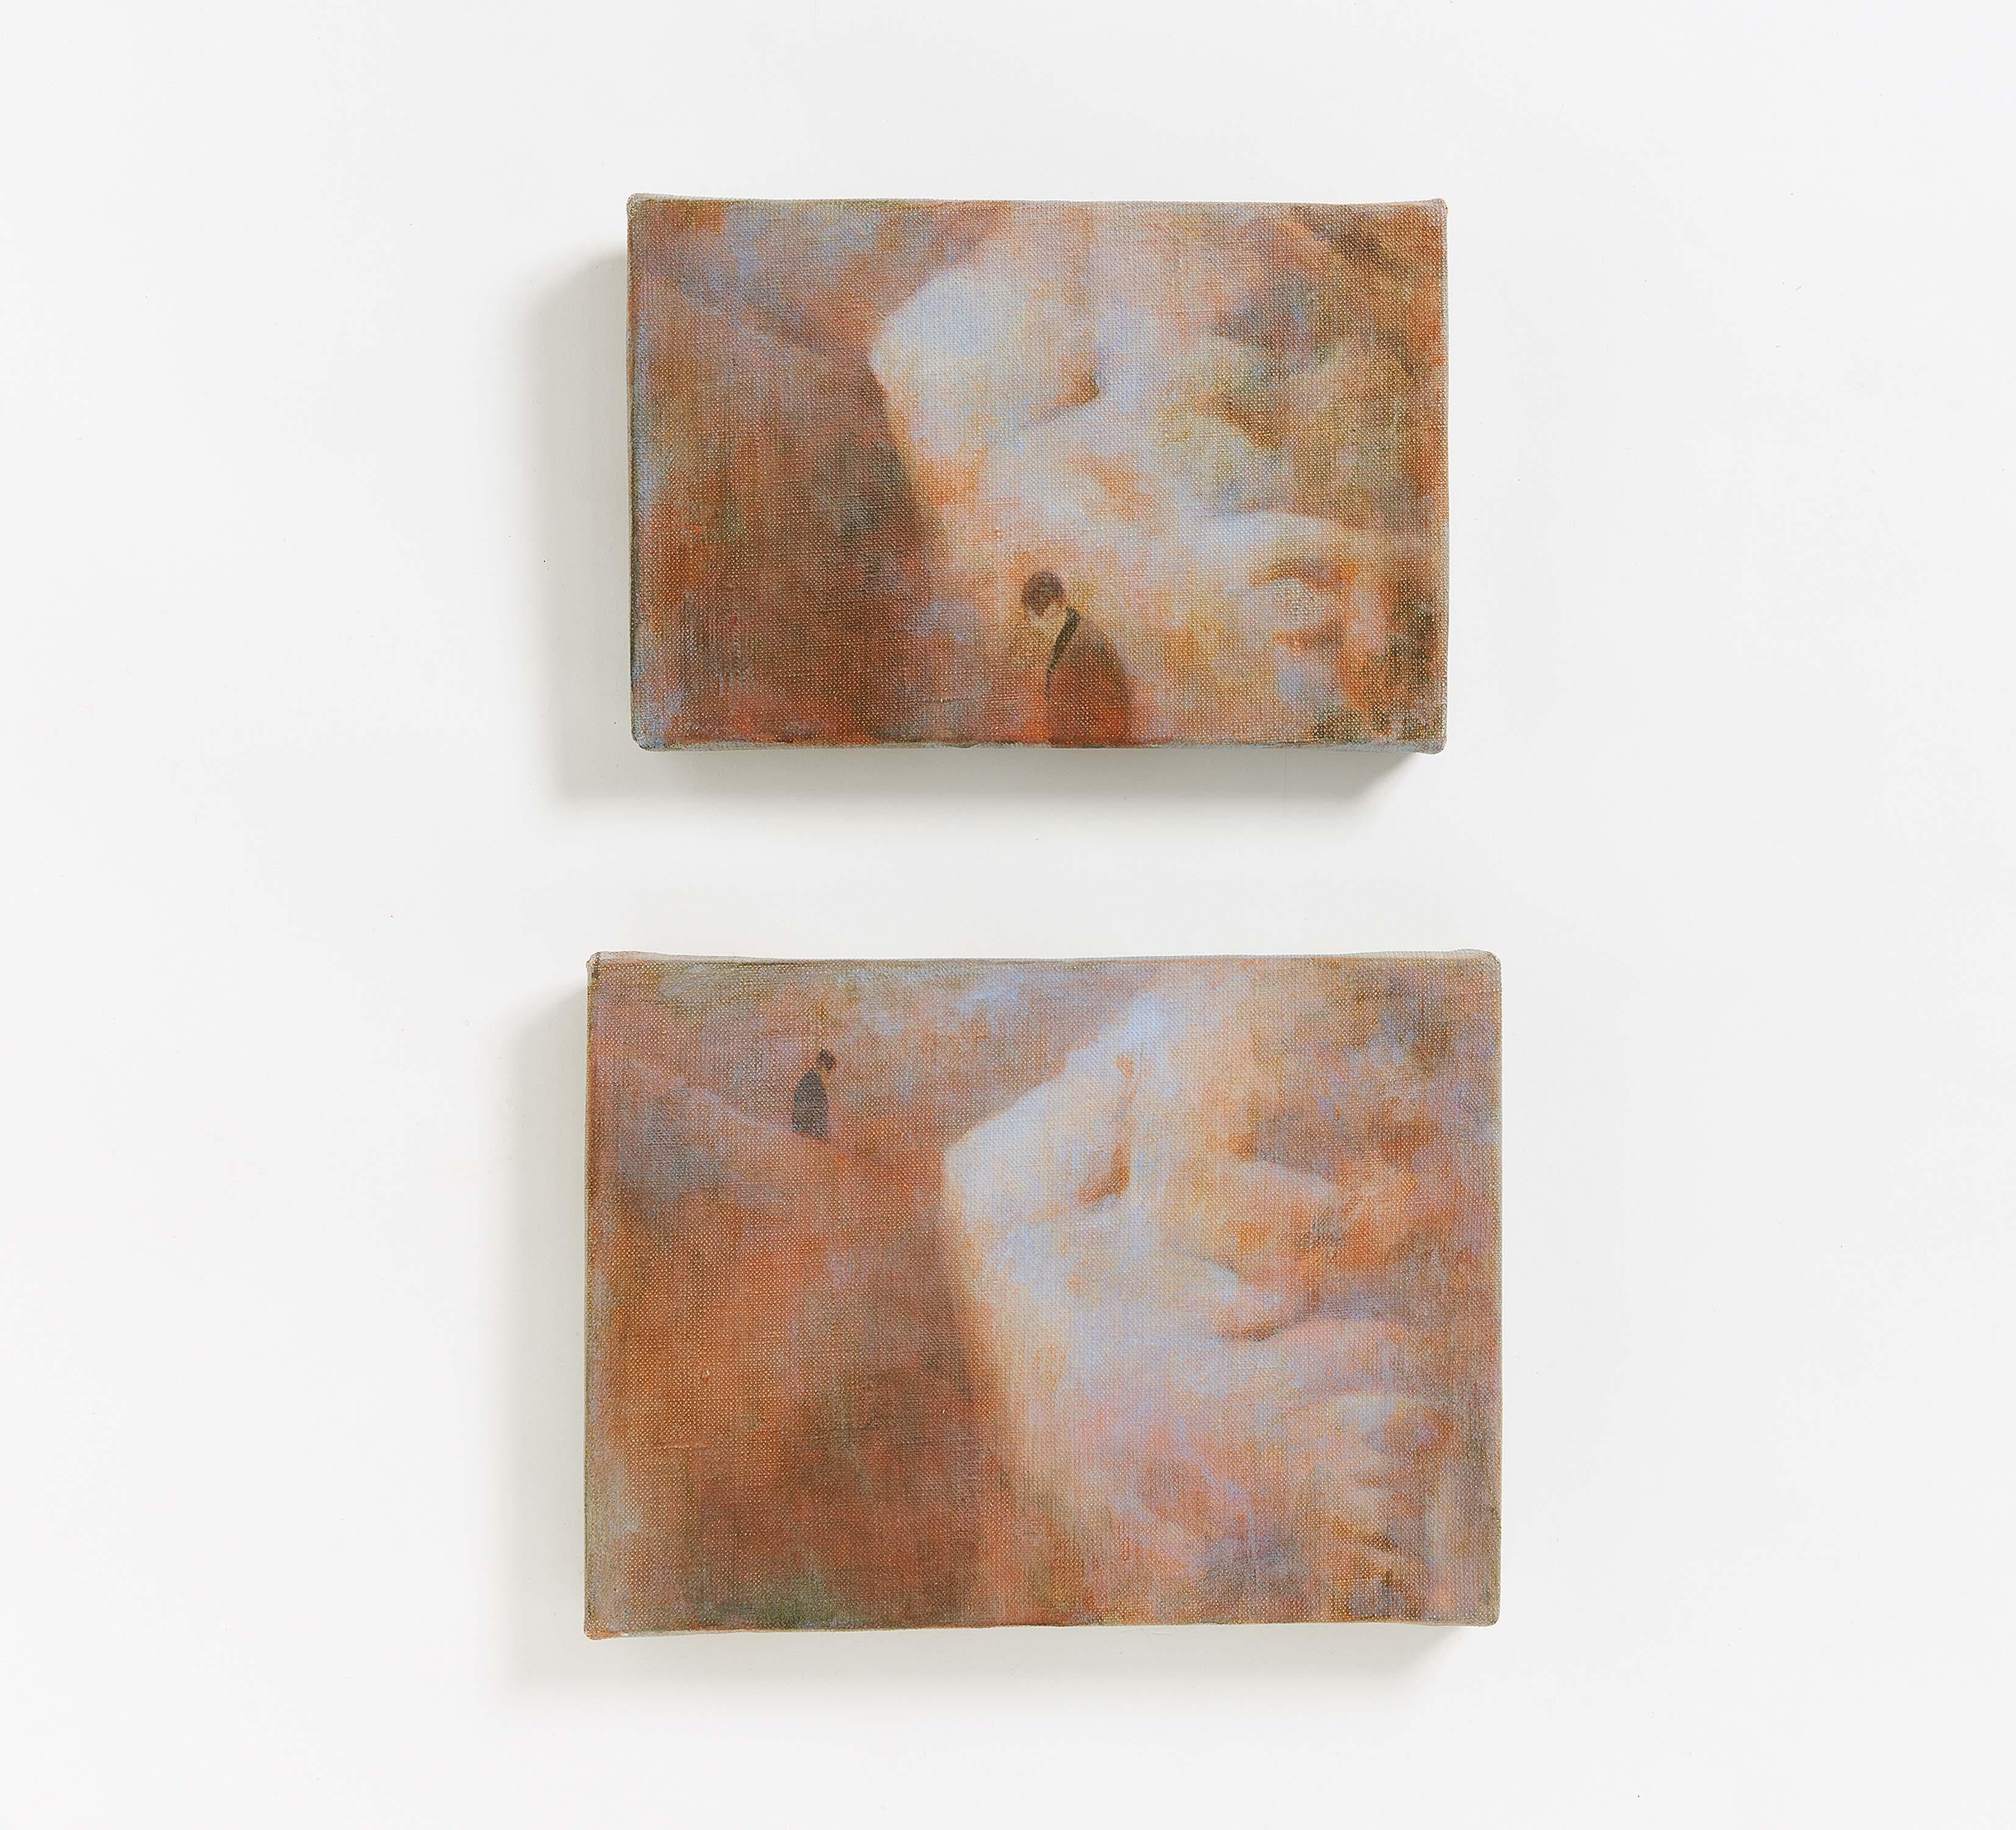 Janis Avotins Abstract Painting - #8 (diptych), 2004.  Acrylic on canvas,  17 x 26 cm; 21 x 29 cm